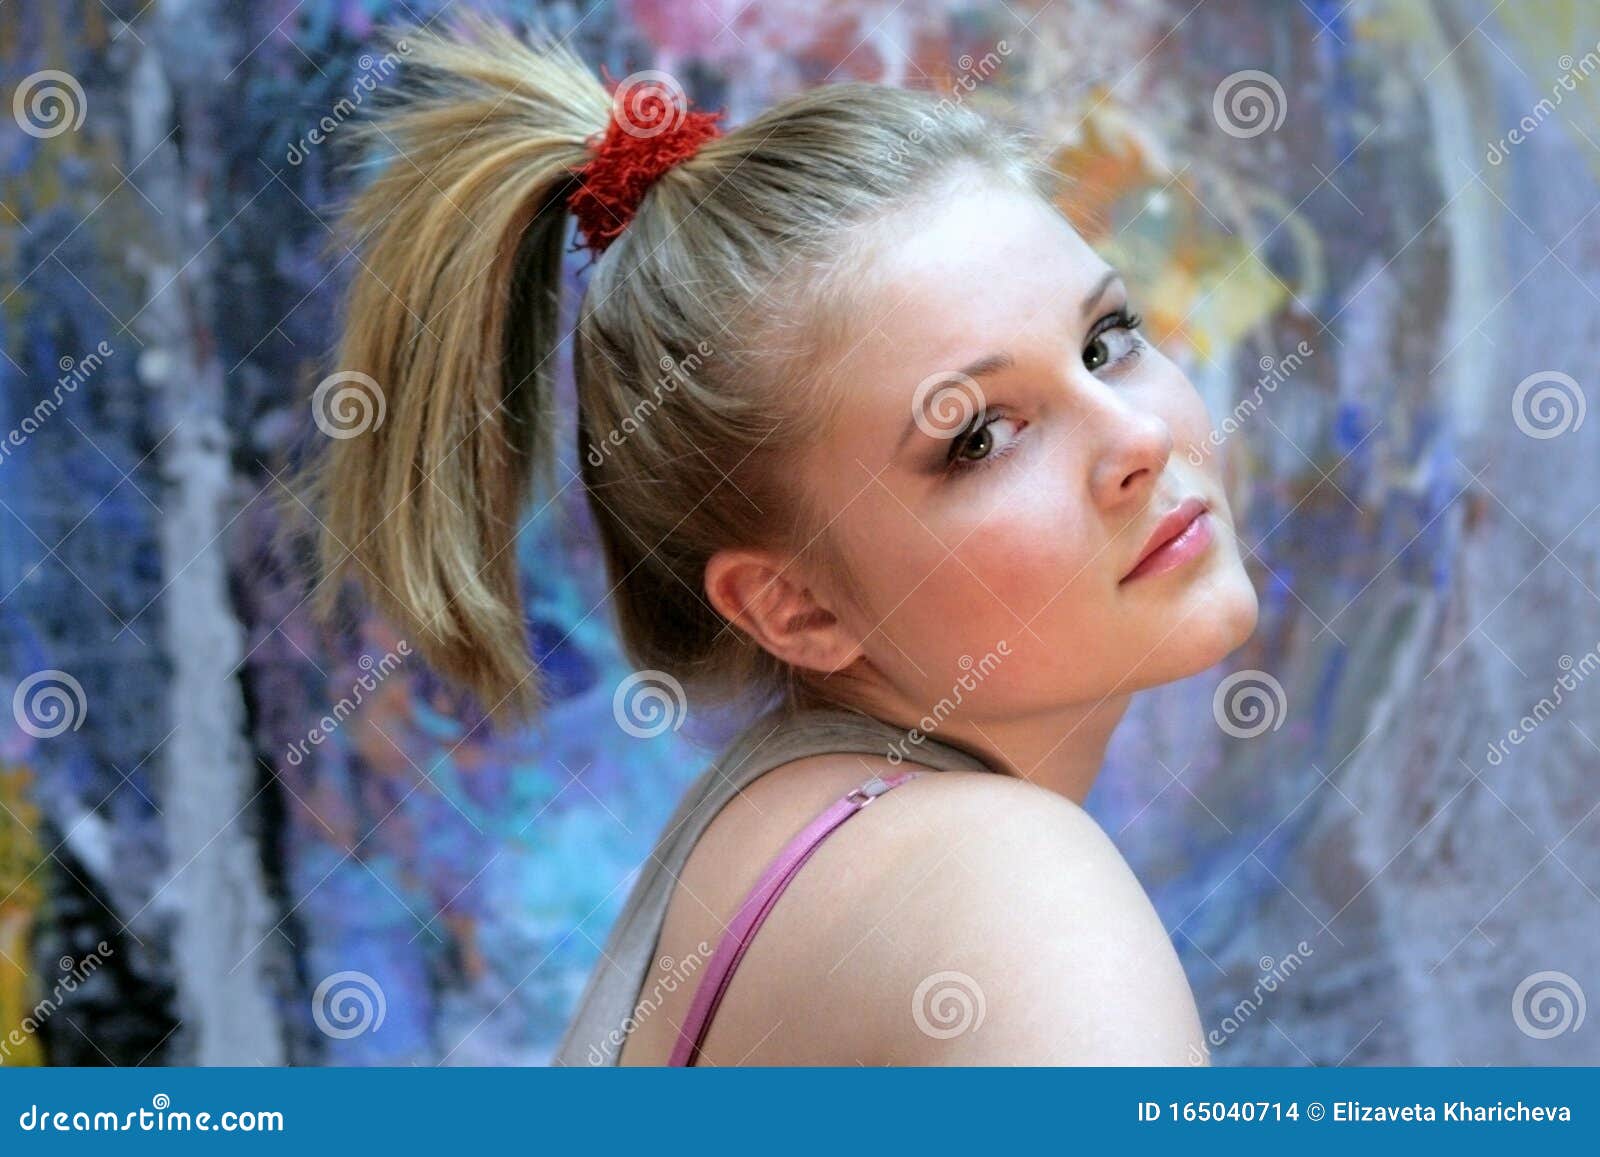 8. Blonde Teen Girl with Ponytail - wide 11